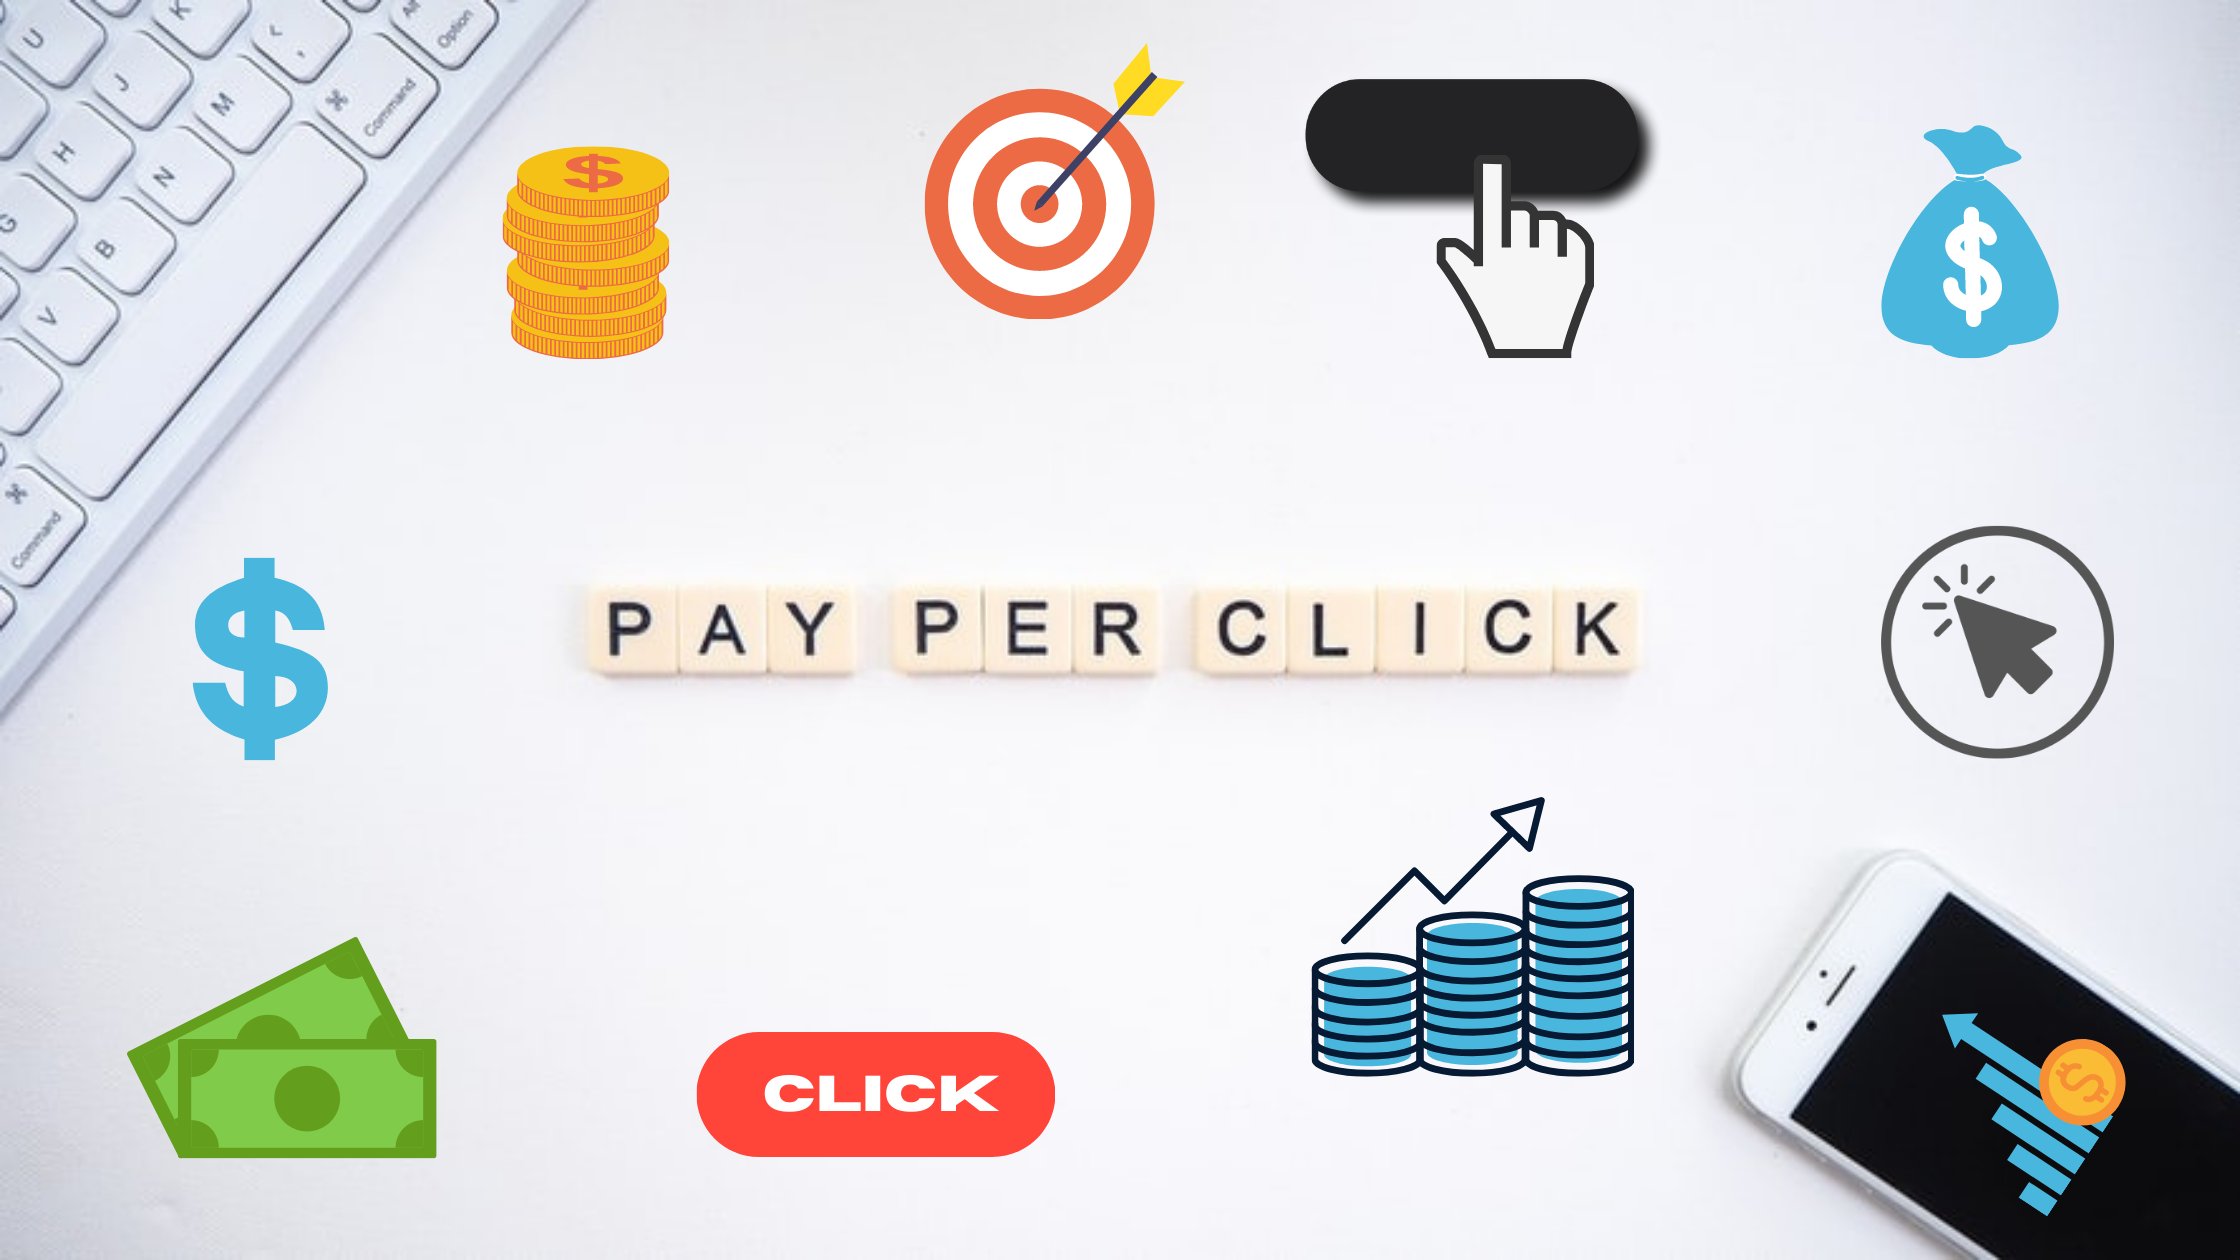 PPC model is mainly offered by search engines and social networking platforms.